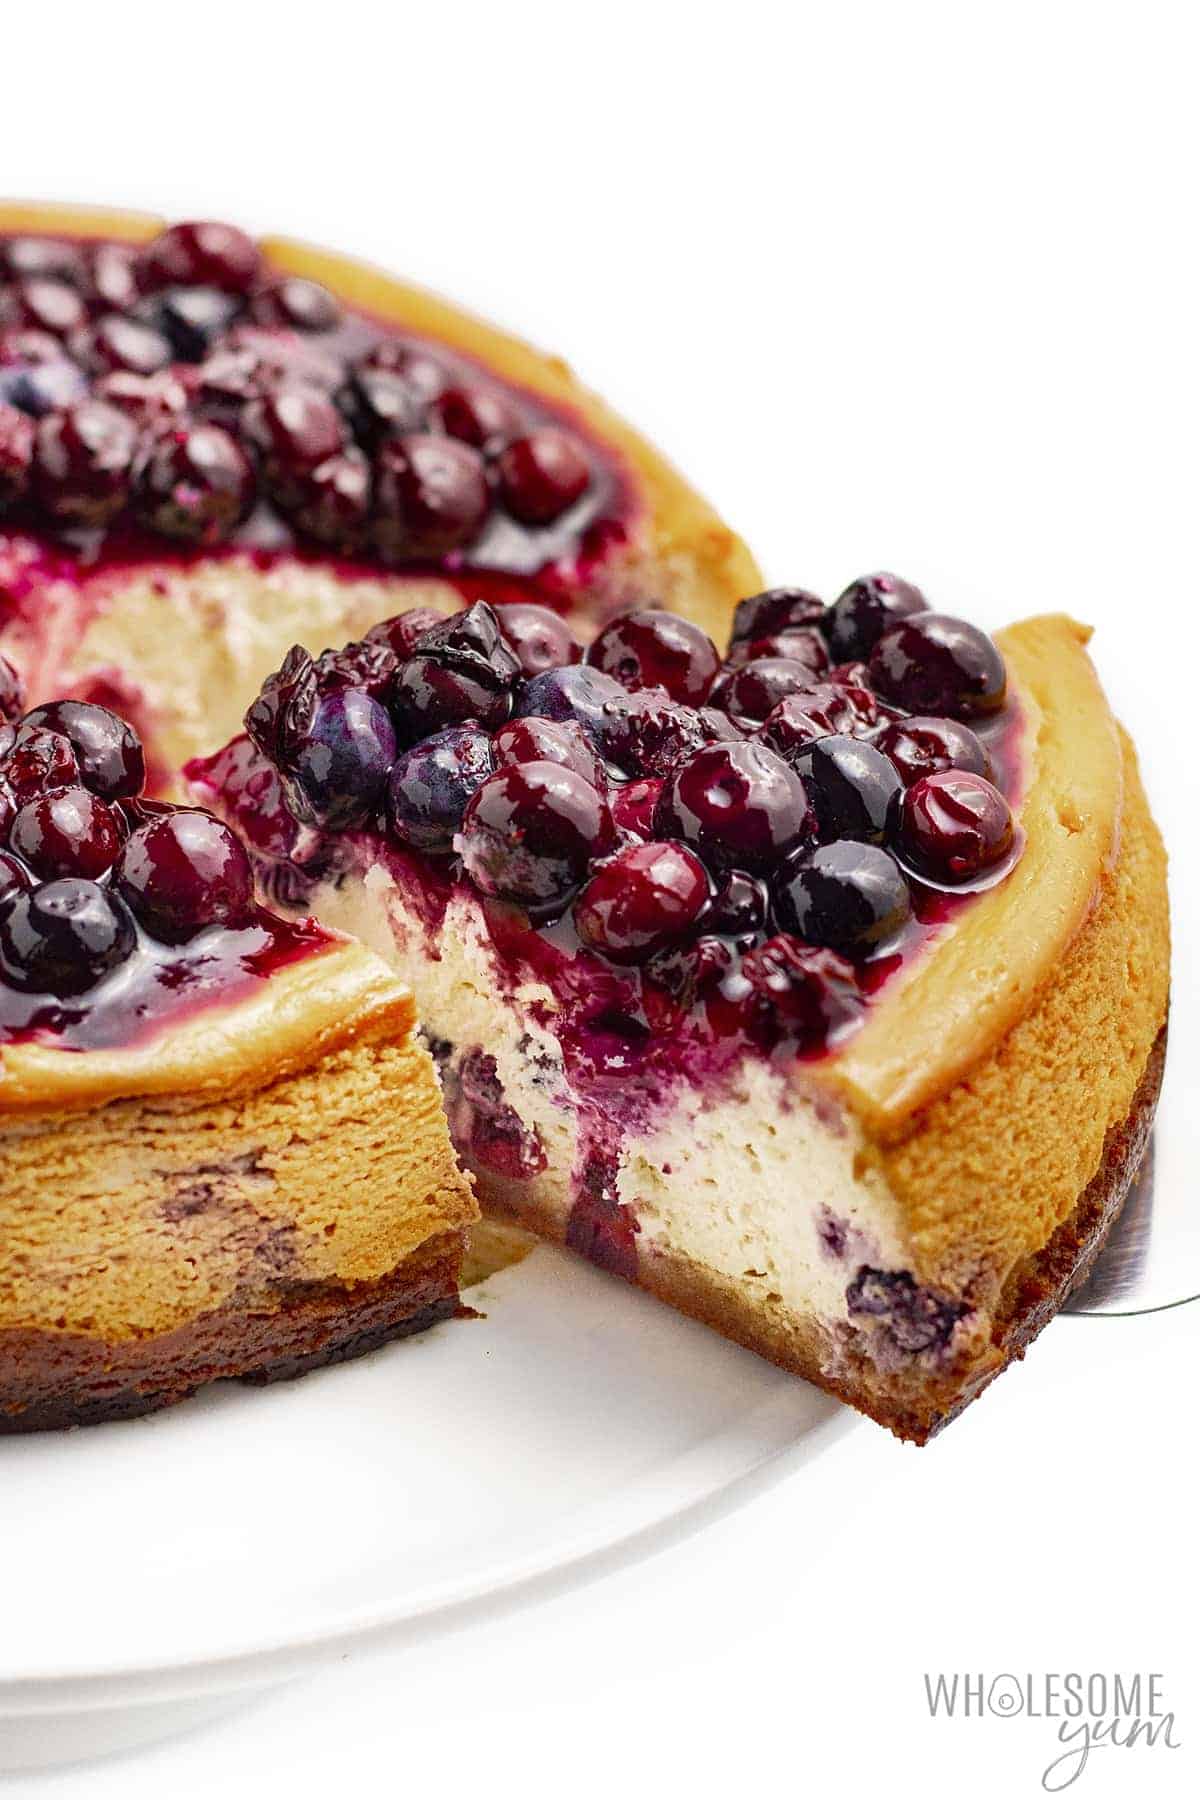 Slice of low carb blueberry cheesecake coming out of whole cake.